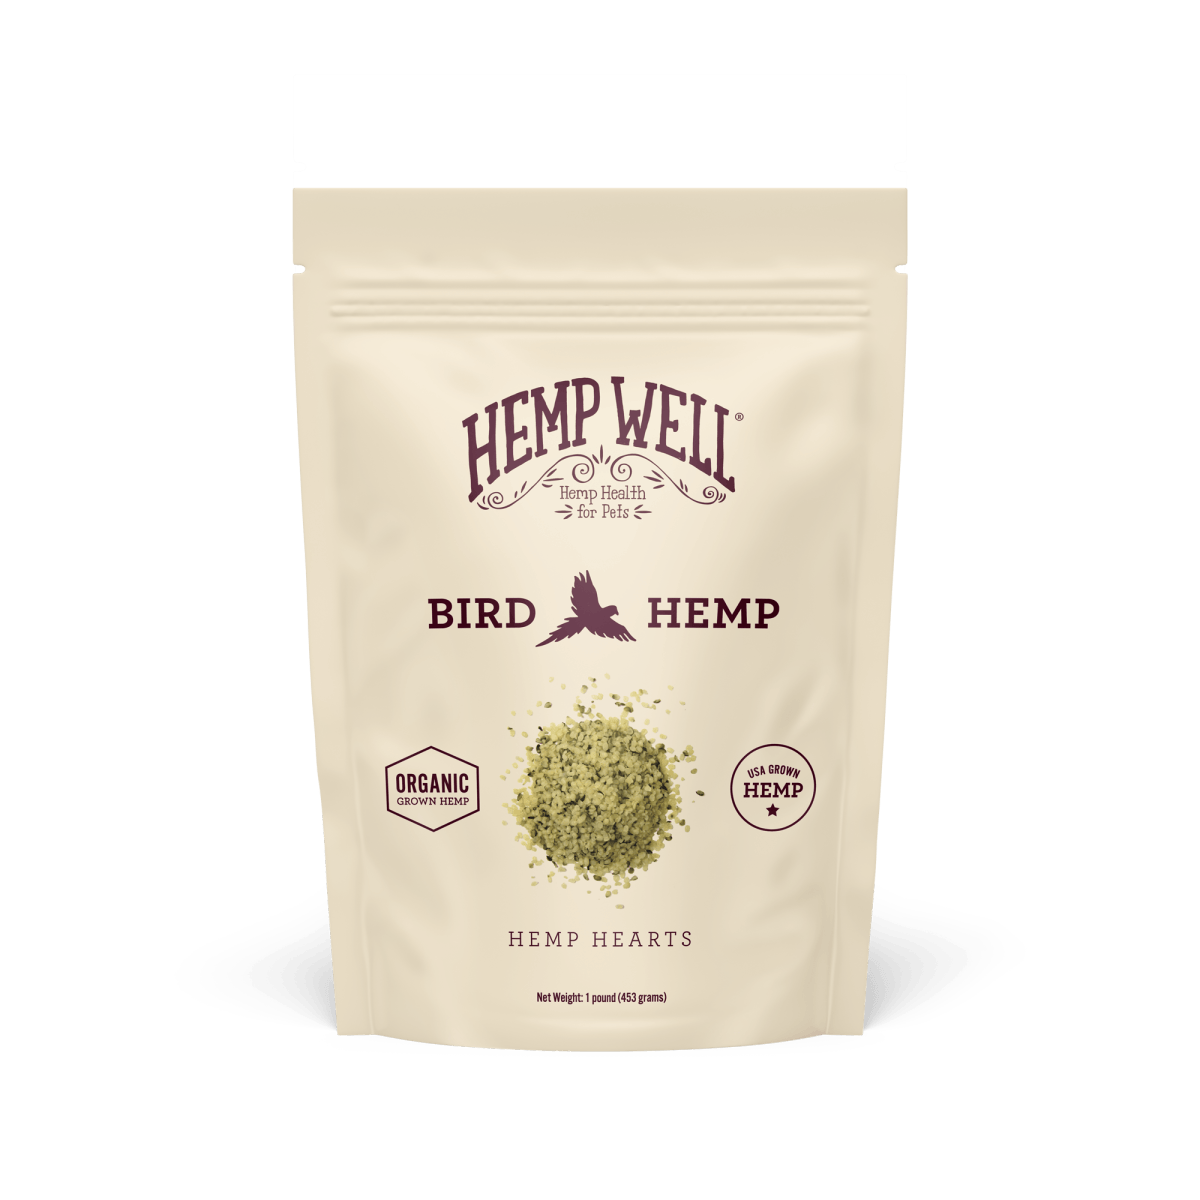 Bird Hemp Hearts - Hemp Well. Avian Superfood: Organic Hulled Hemp Seeds for Feathered Friends! Achieve the Perfect Omega Balance for Daily Well-being.